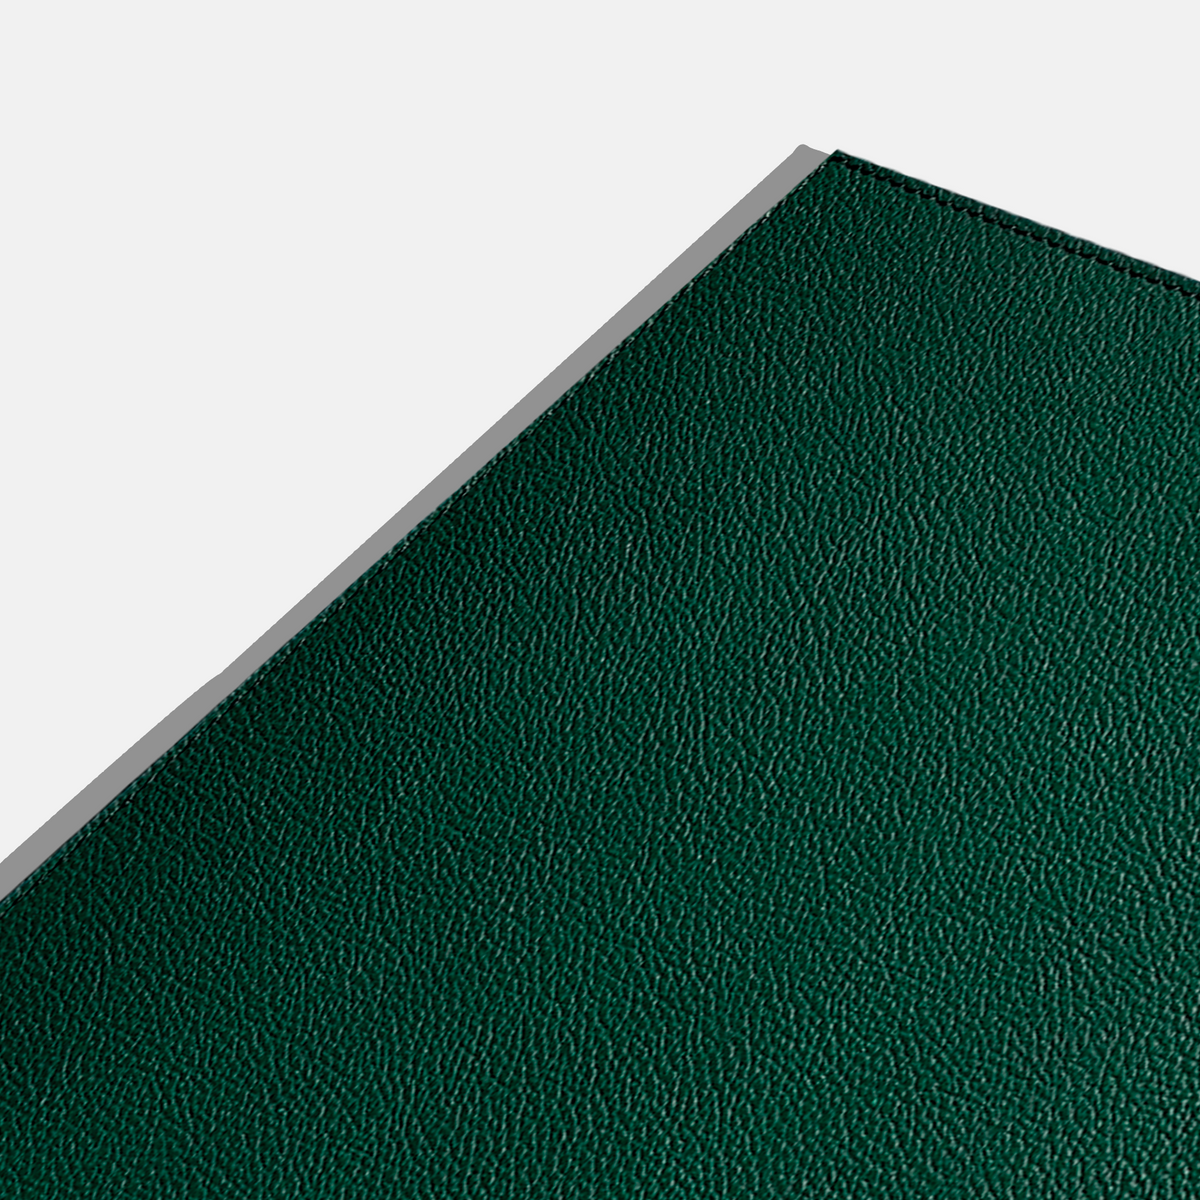 Desk Pad - Forest Green